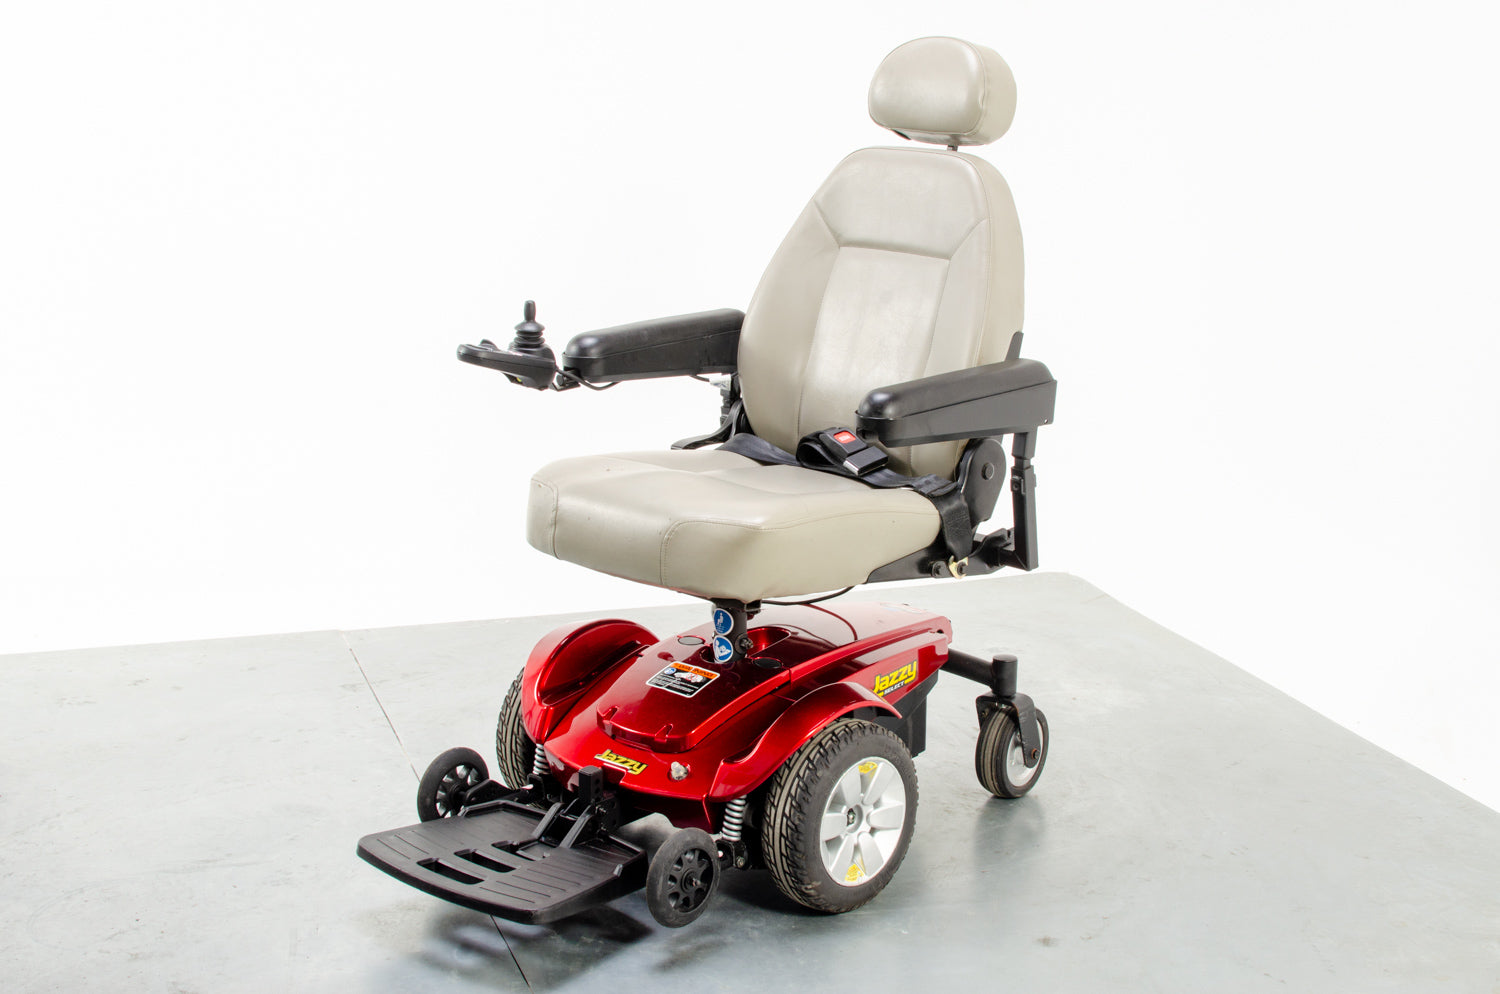 Pride Jazzy Select Used Electric Wheelchair Powerchair Indoor Outdoor MWD